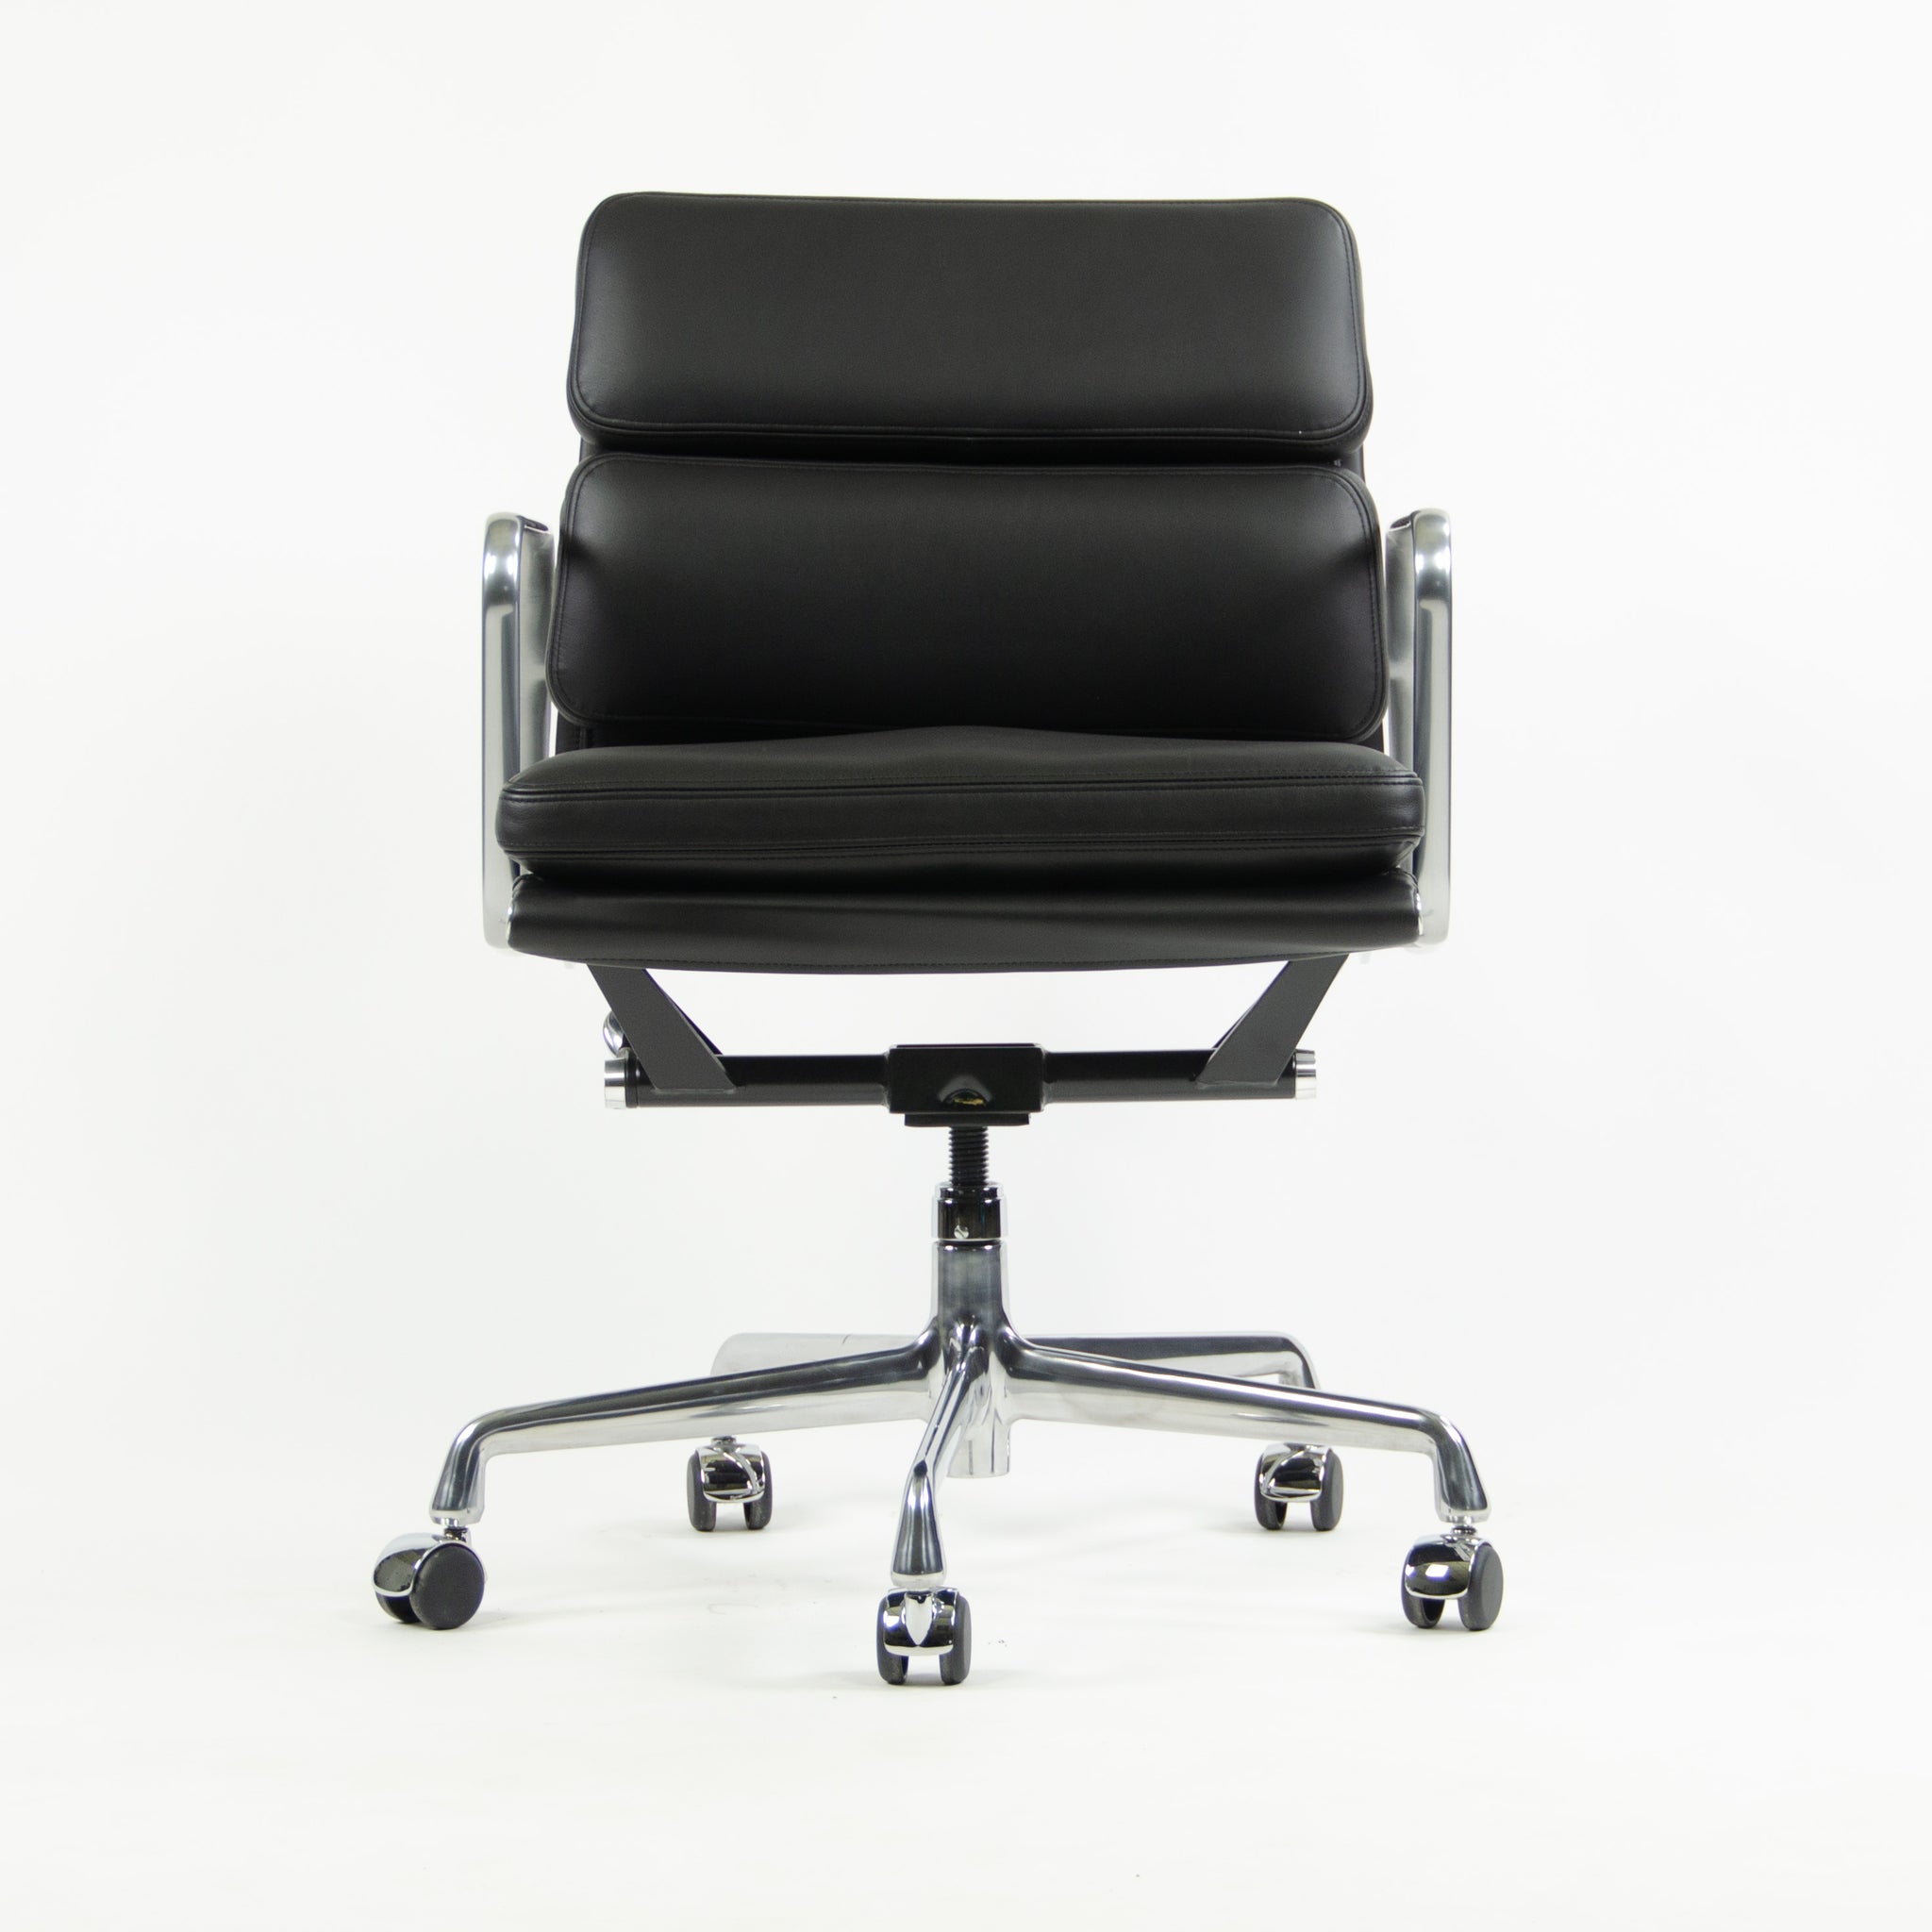 SOLD Brand New 2017 Eames Herman Miller Low Soft Pad Aluminum Desk Chair Black Leather